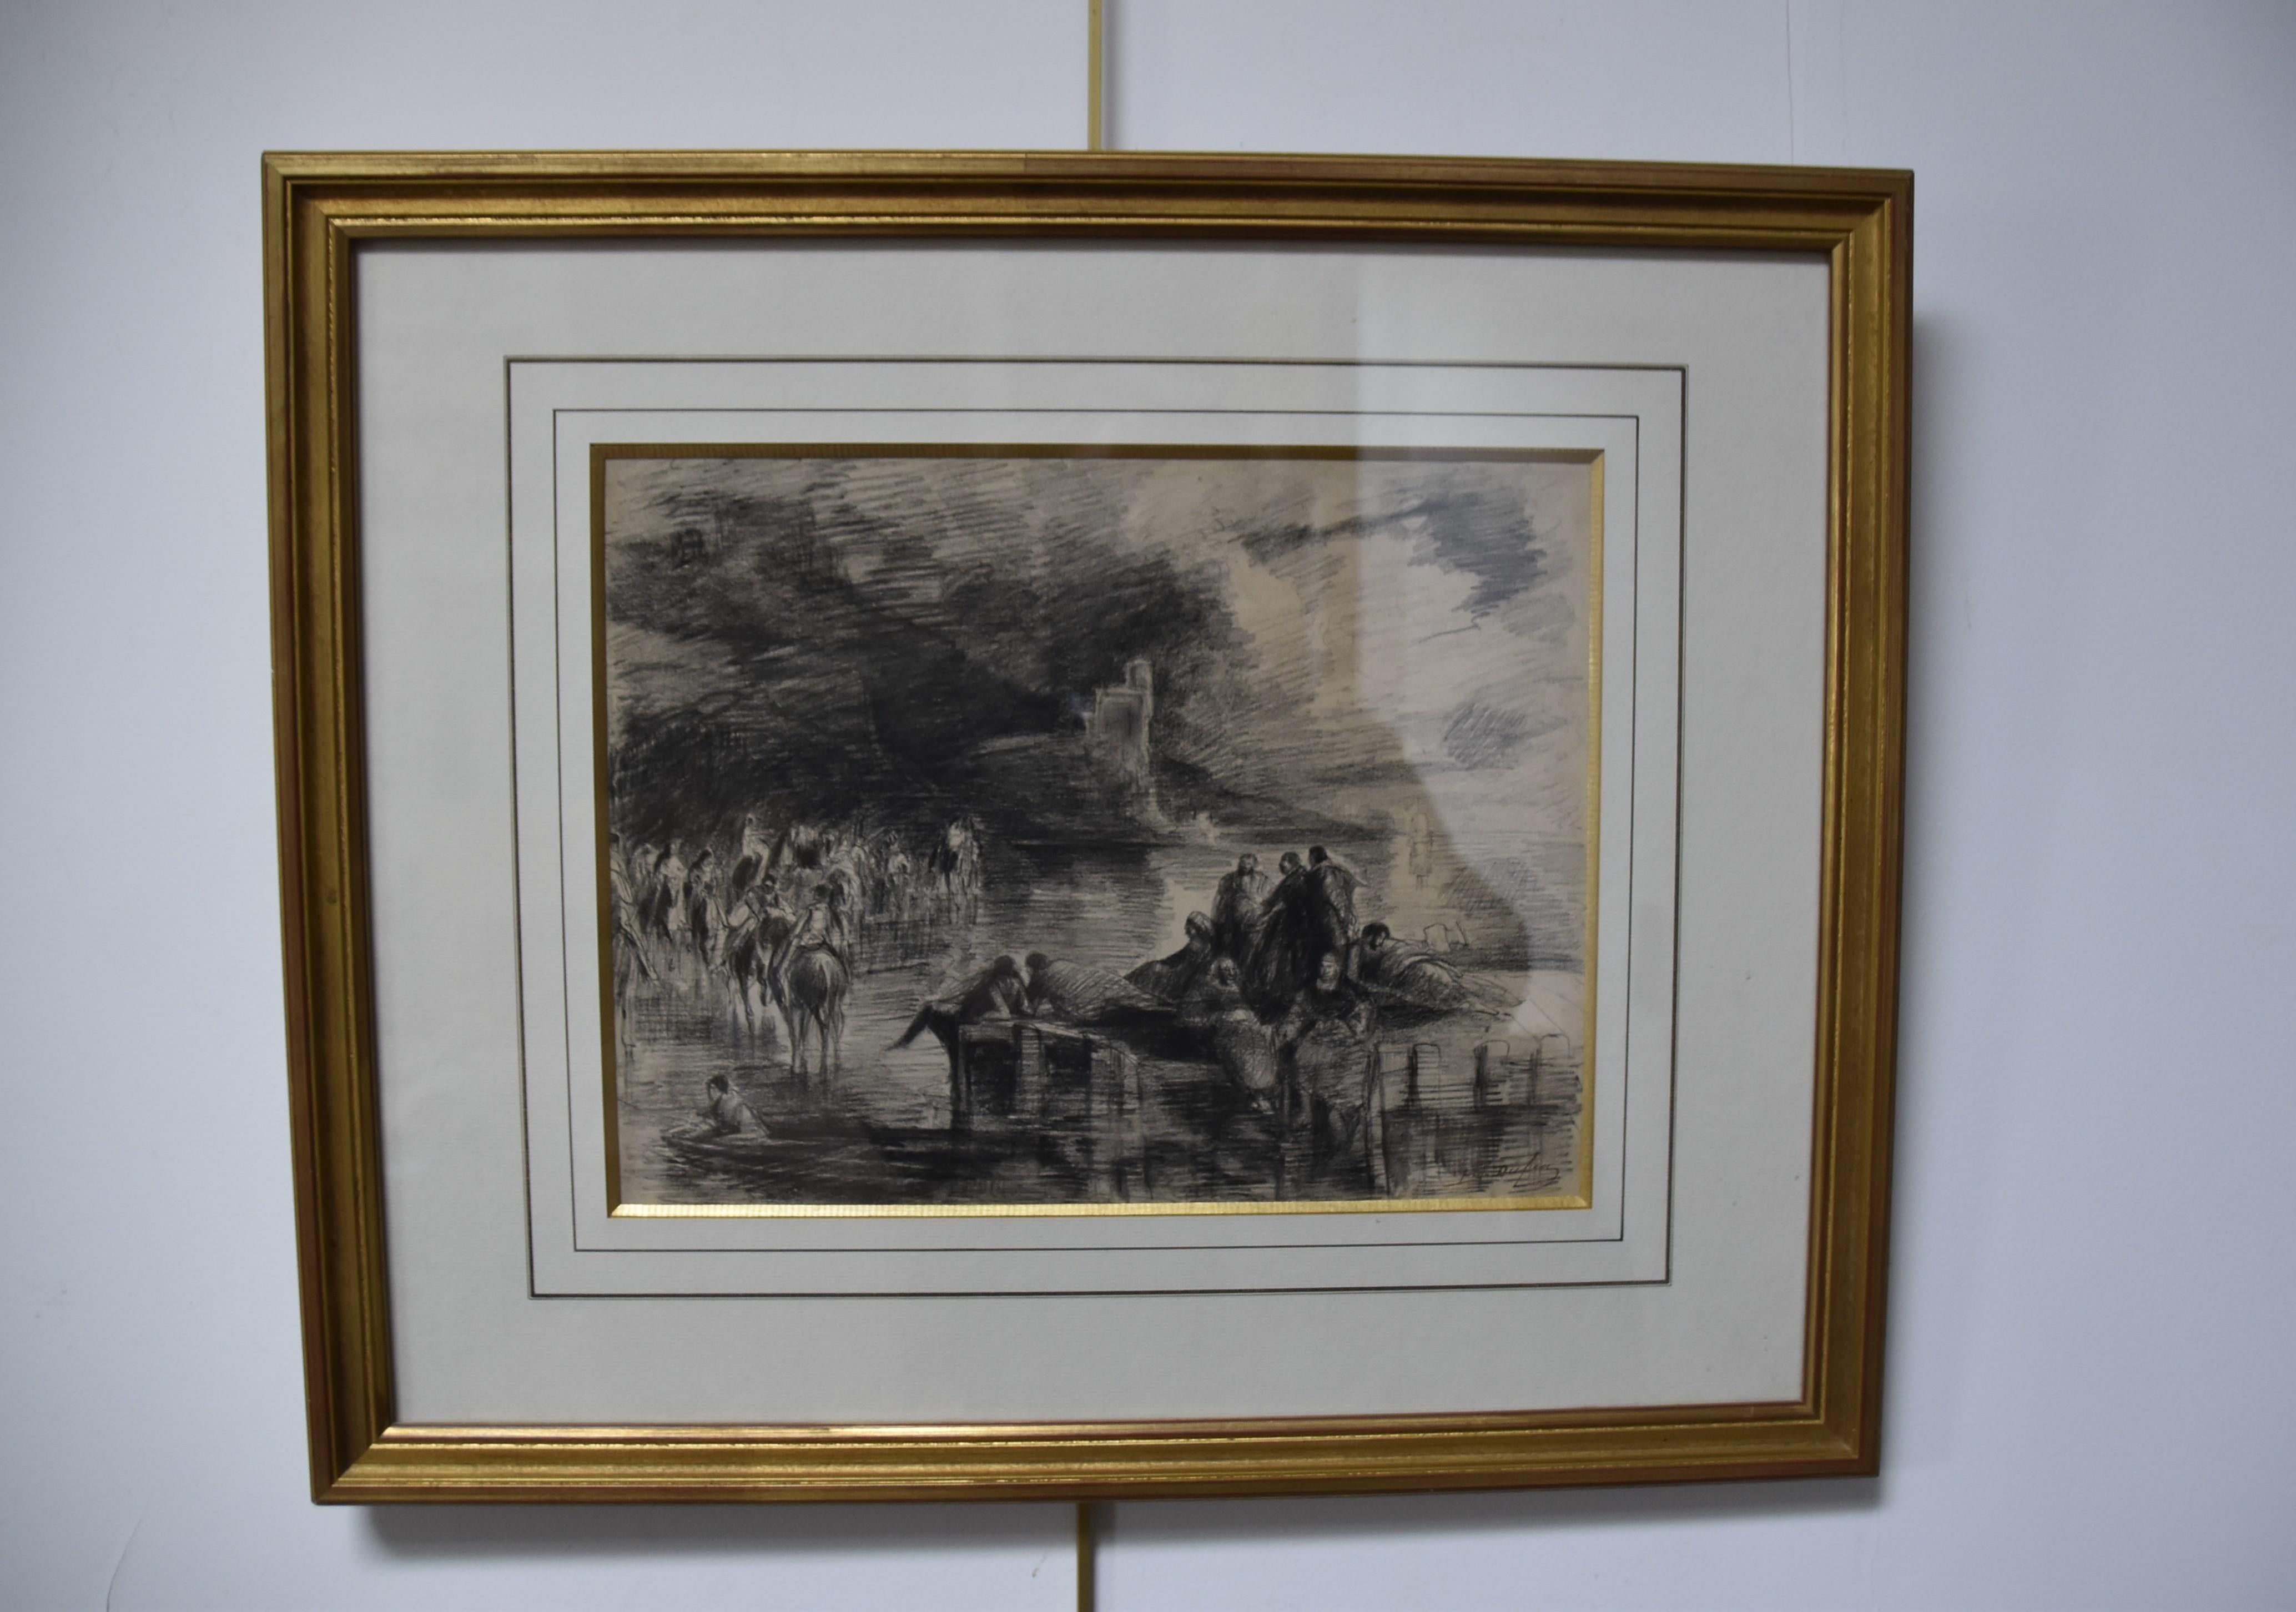 Edouard Dufeu (1836-1900)  
A Fantastic scene by a lake
Charcoal on paper
Signed lower right
23 x 30,5 cm
Framed under glass : 42.5 x 51 cm

This fantastic scene, the subject of which remains a mystery, reveals an aspect of Edouard Dufeu's